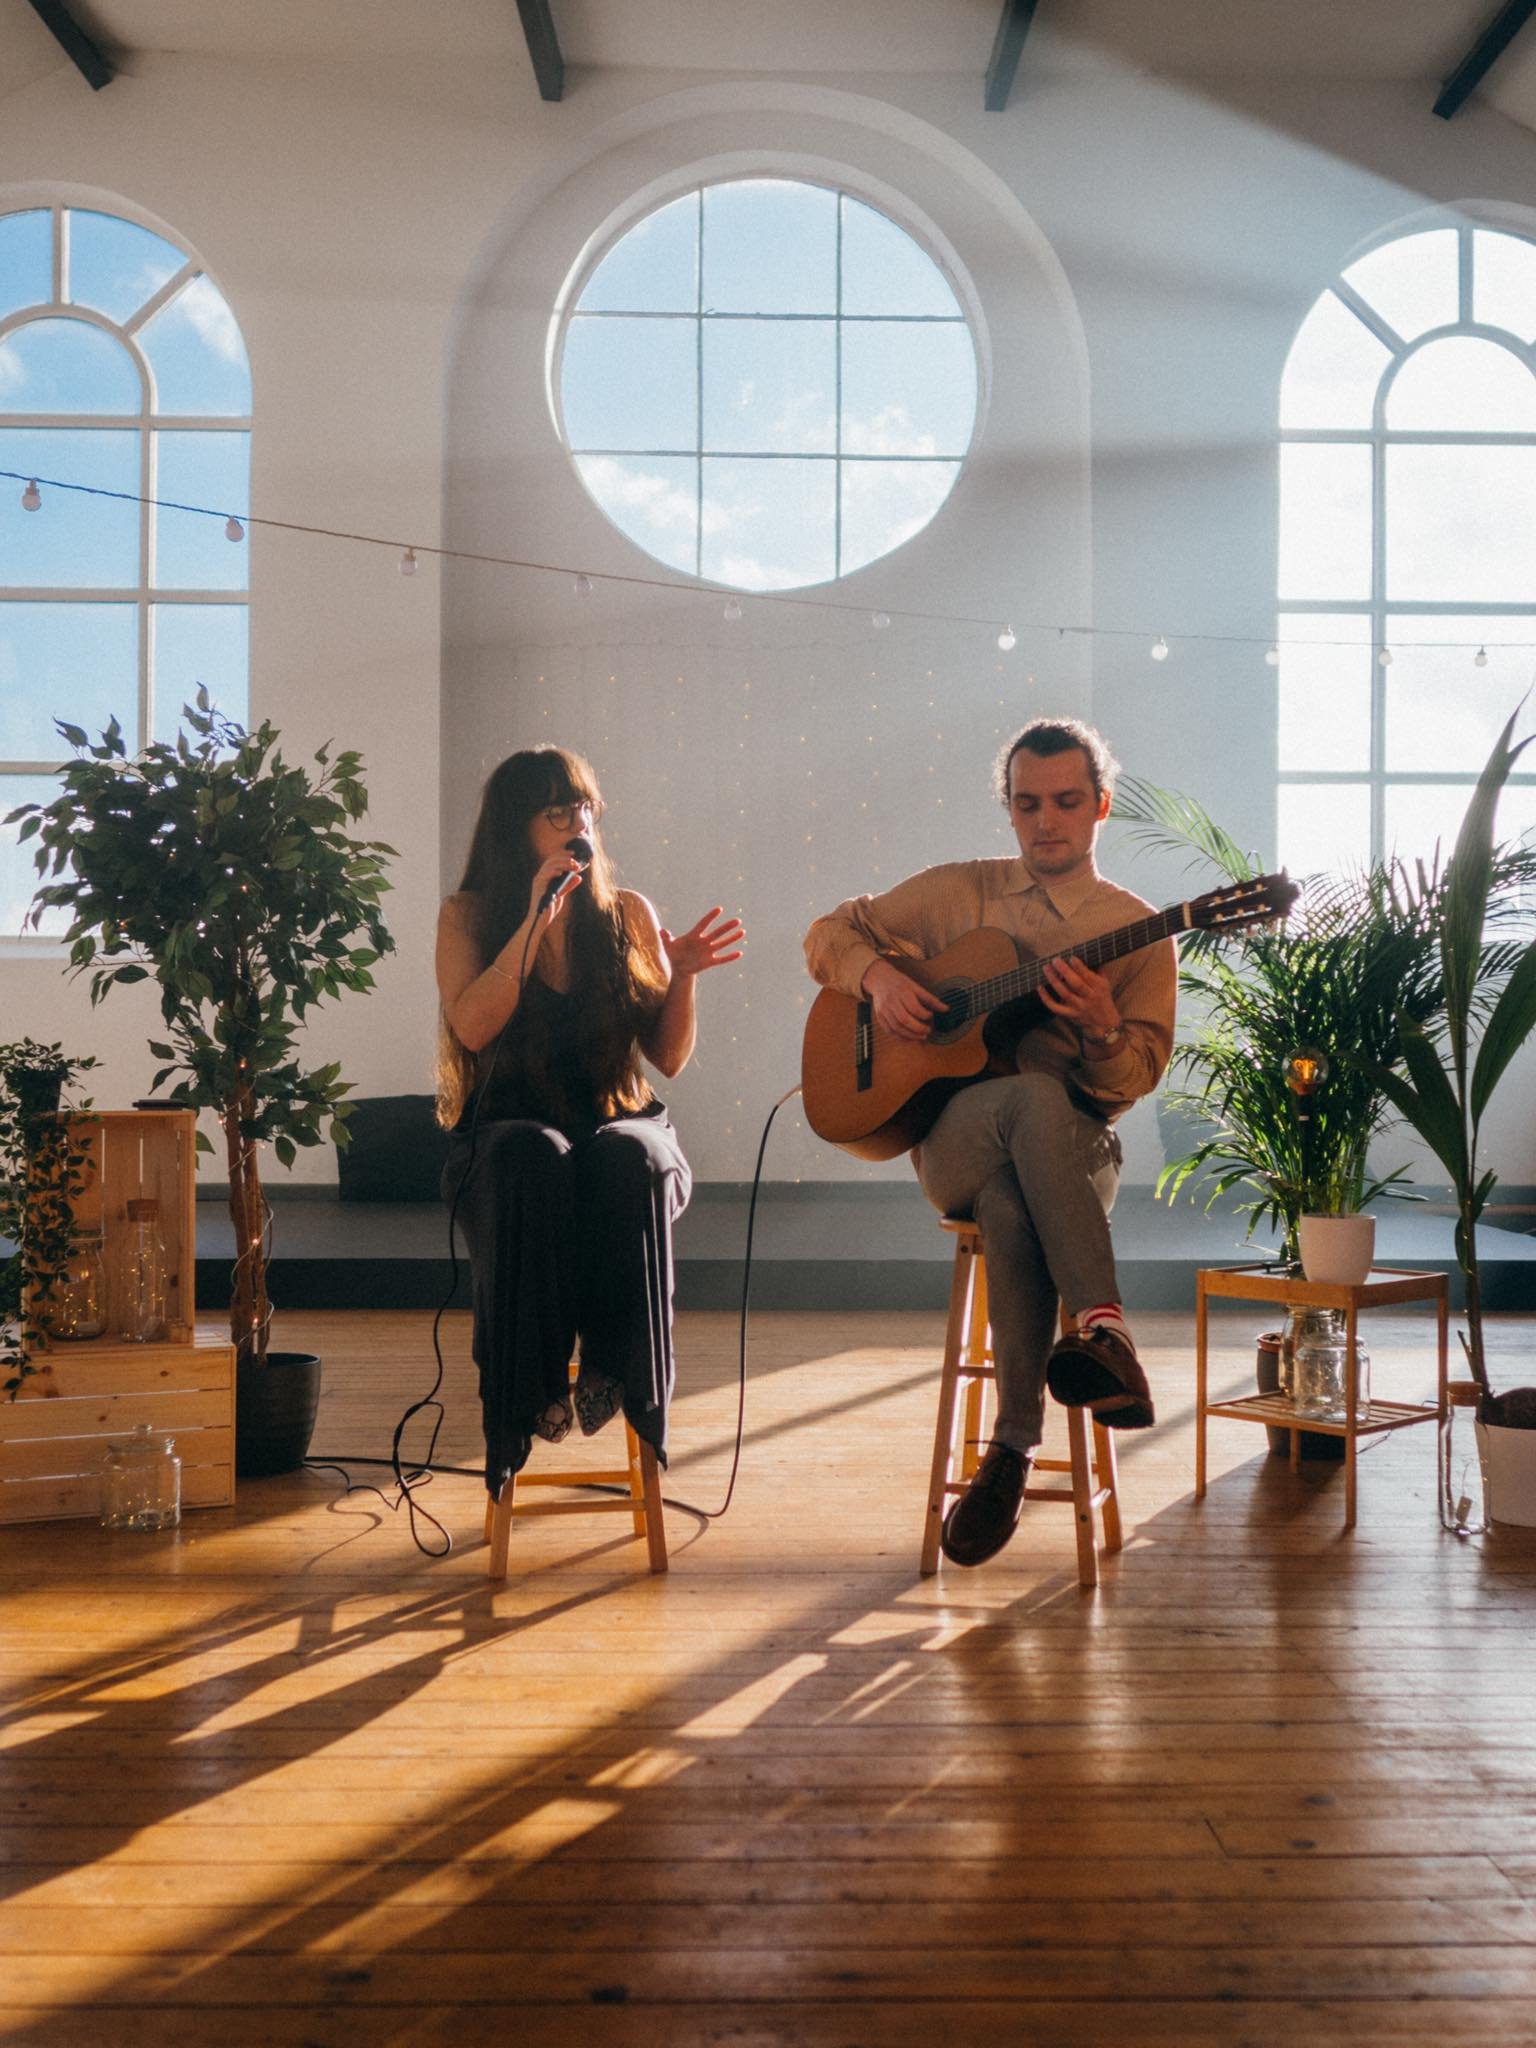  A male and female duet both sitting in wooden stools in a beautifully lit room with arched and circular windows. The woman is singing into a microphone and the man is playing a guitar. 